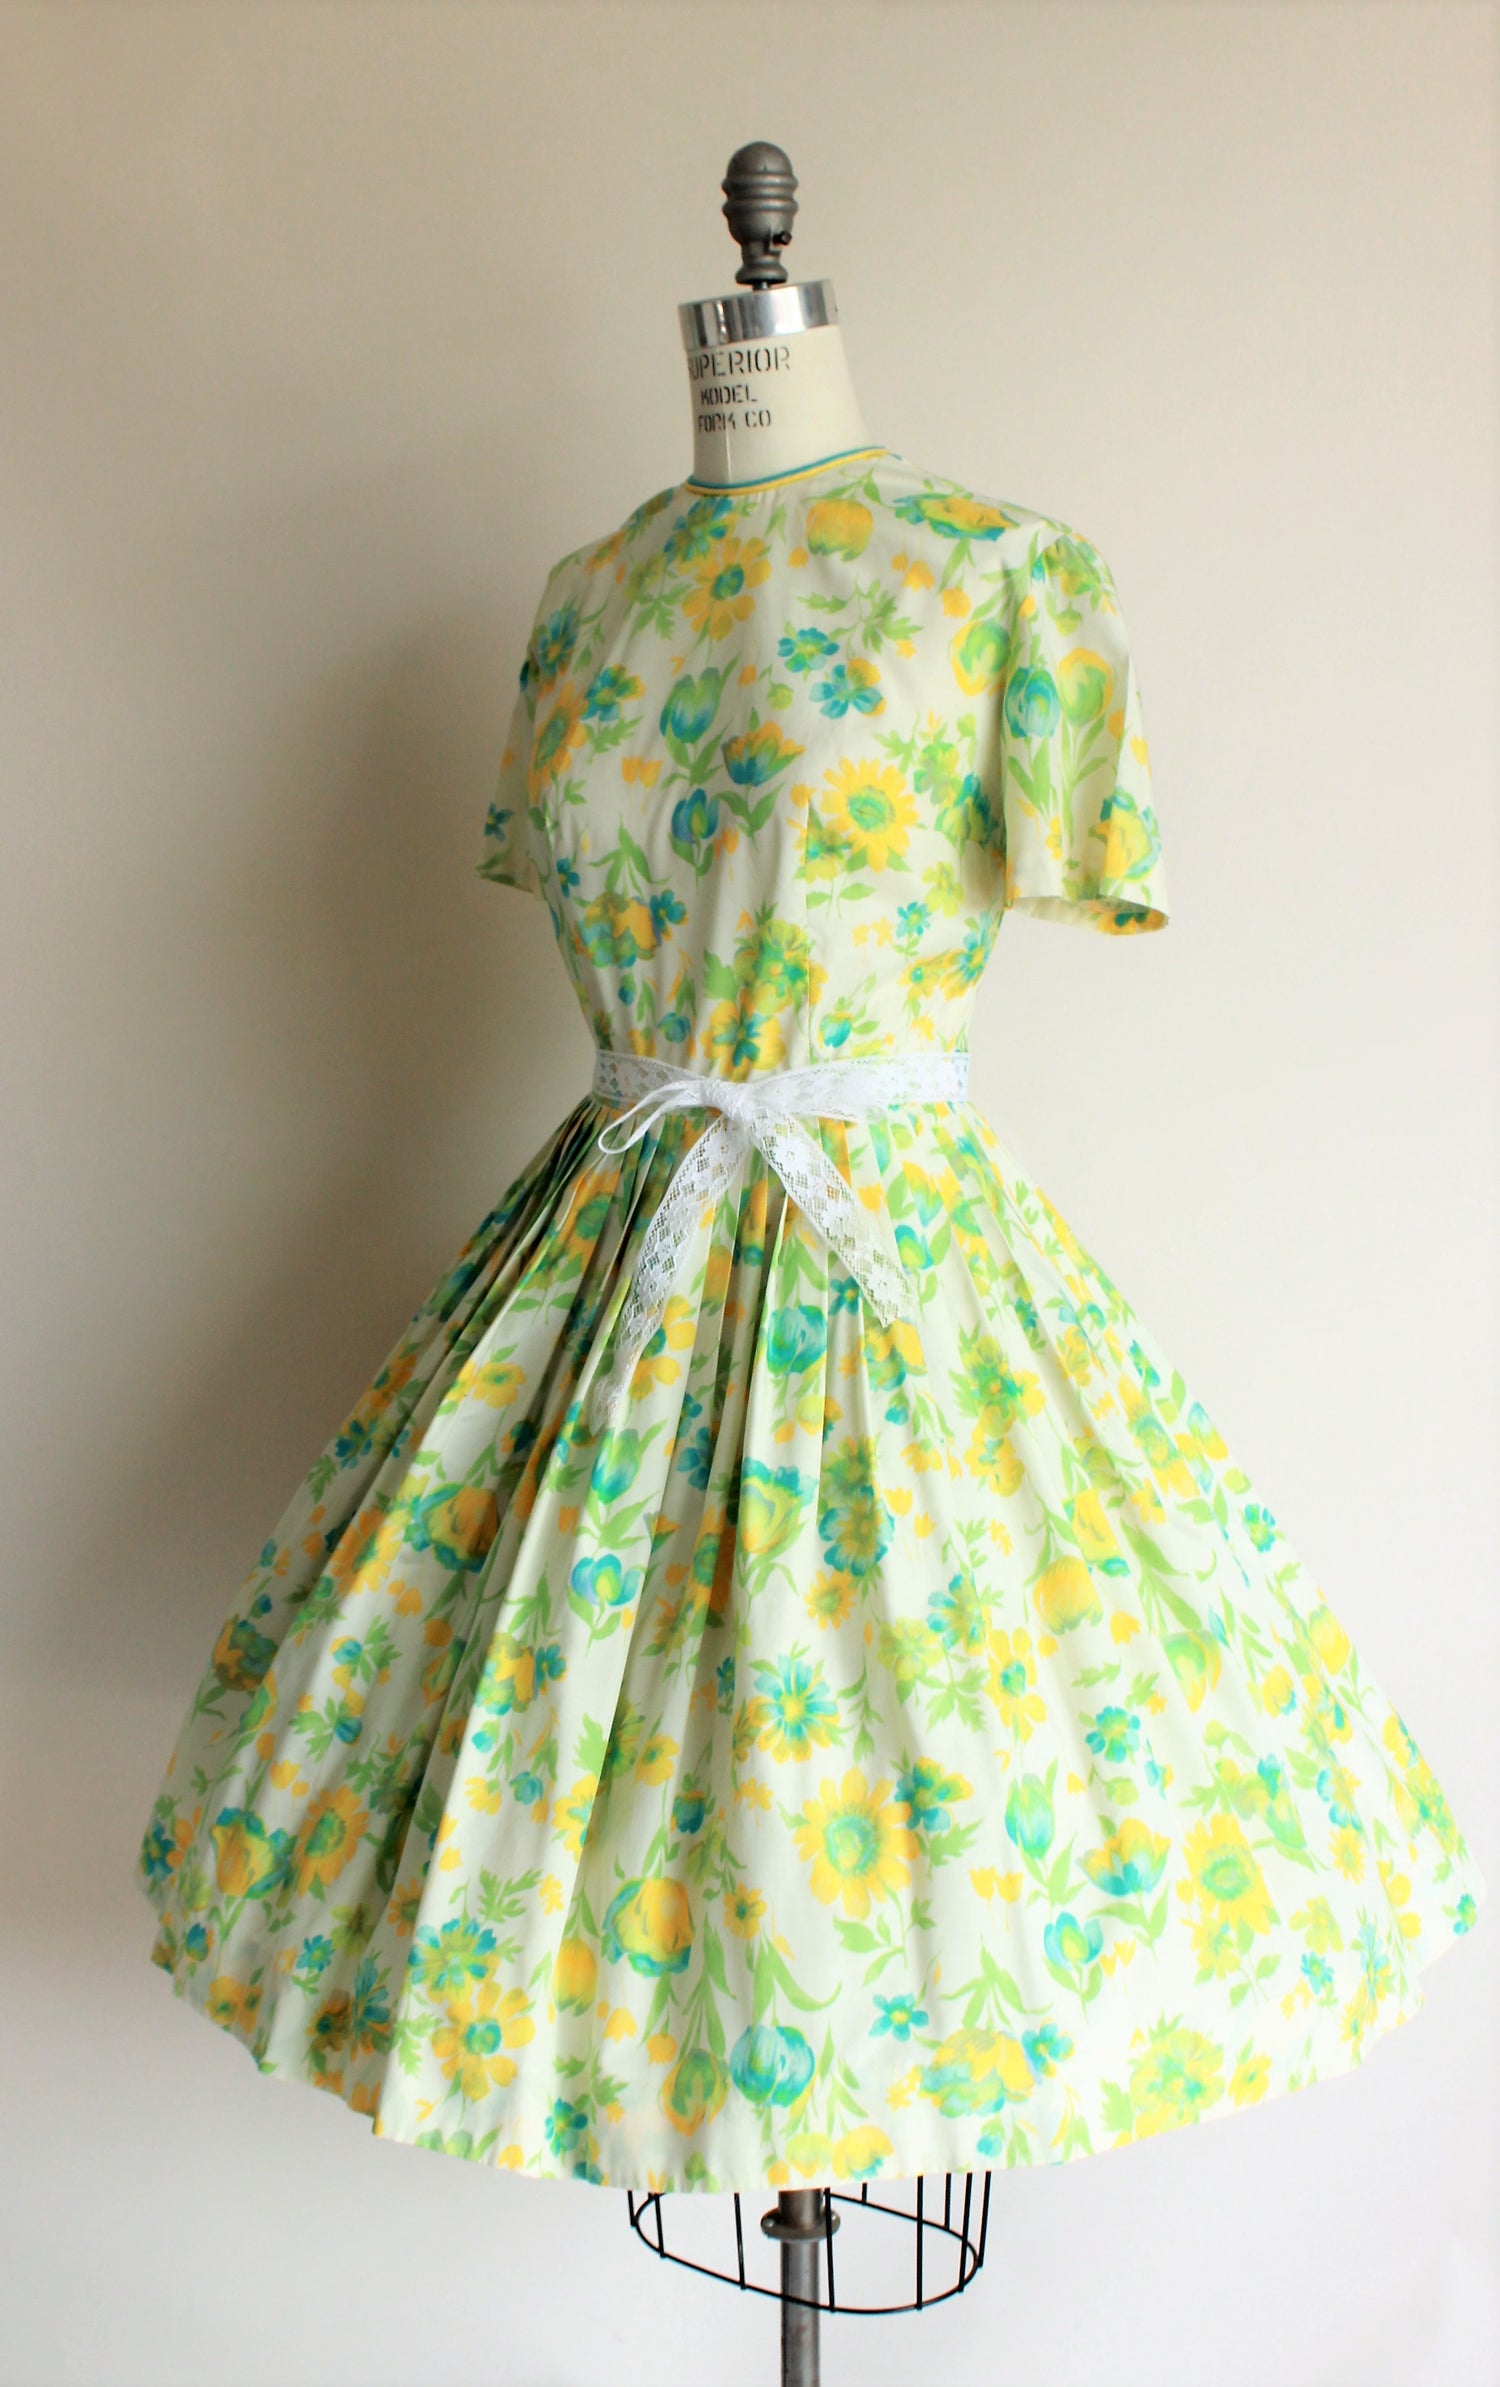 Vintage 1950s Green, Yellow and Blue Floral Print Dress